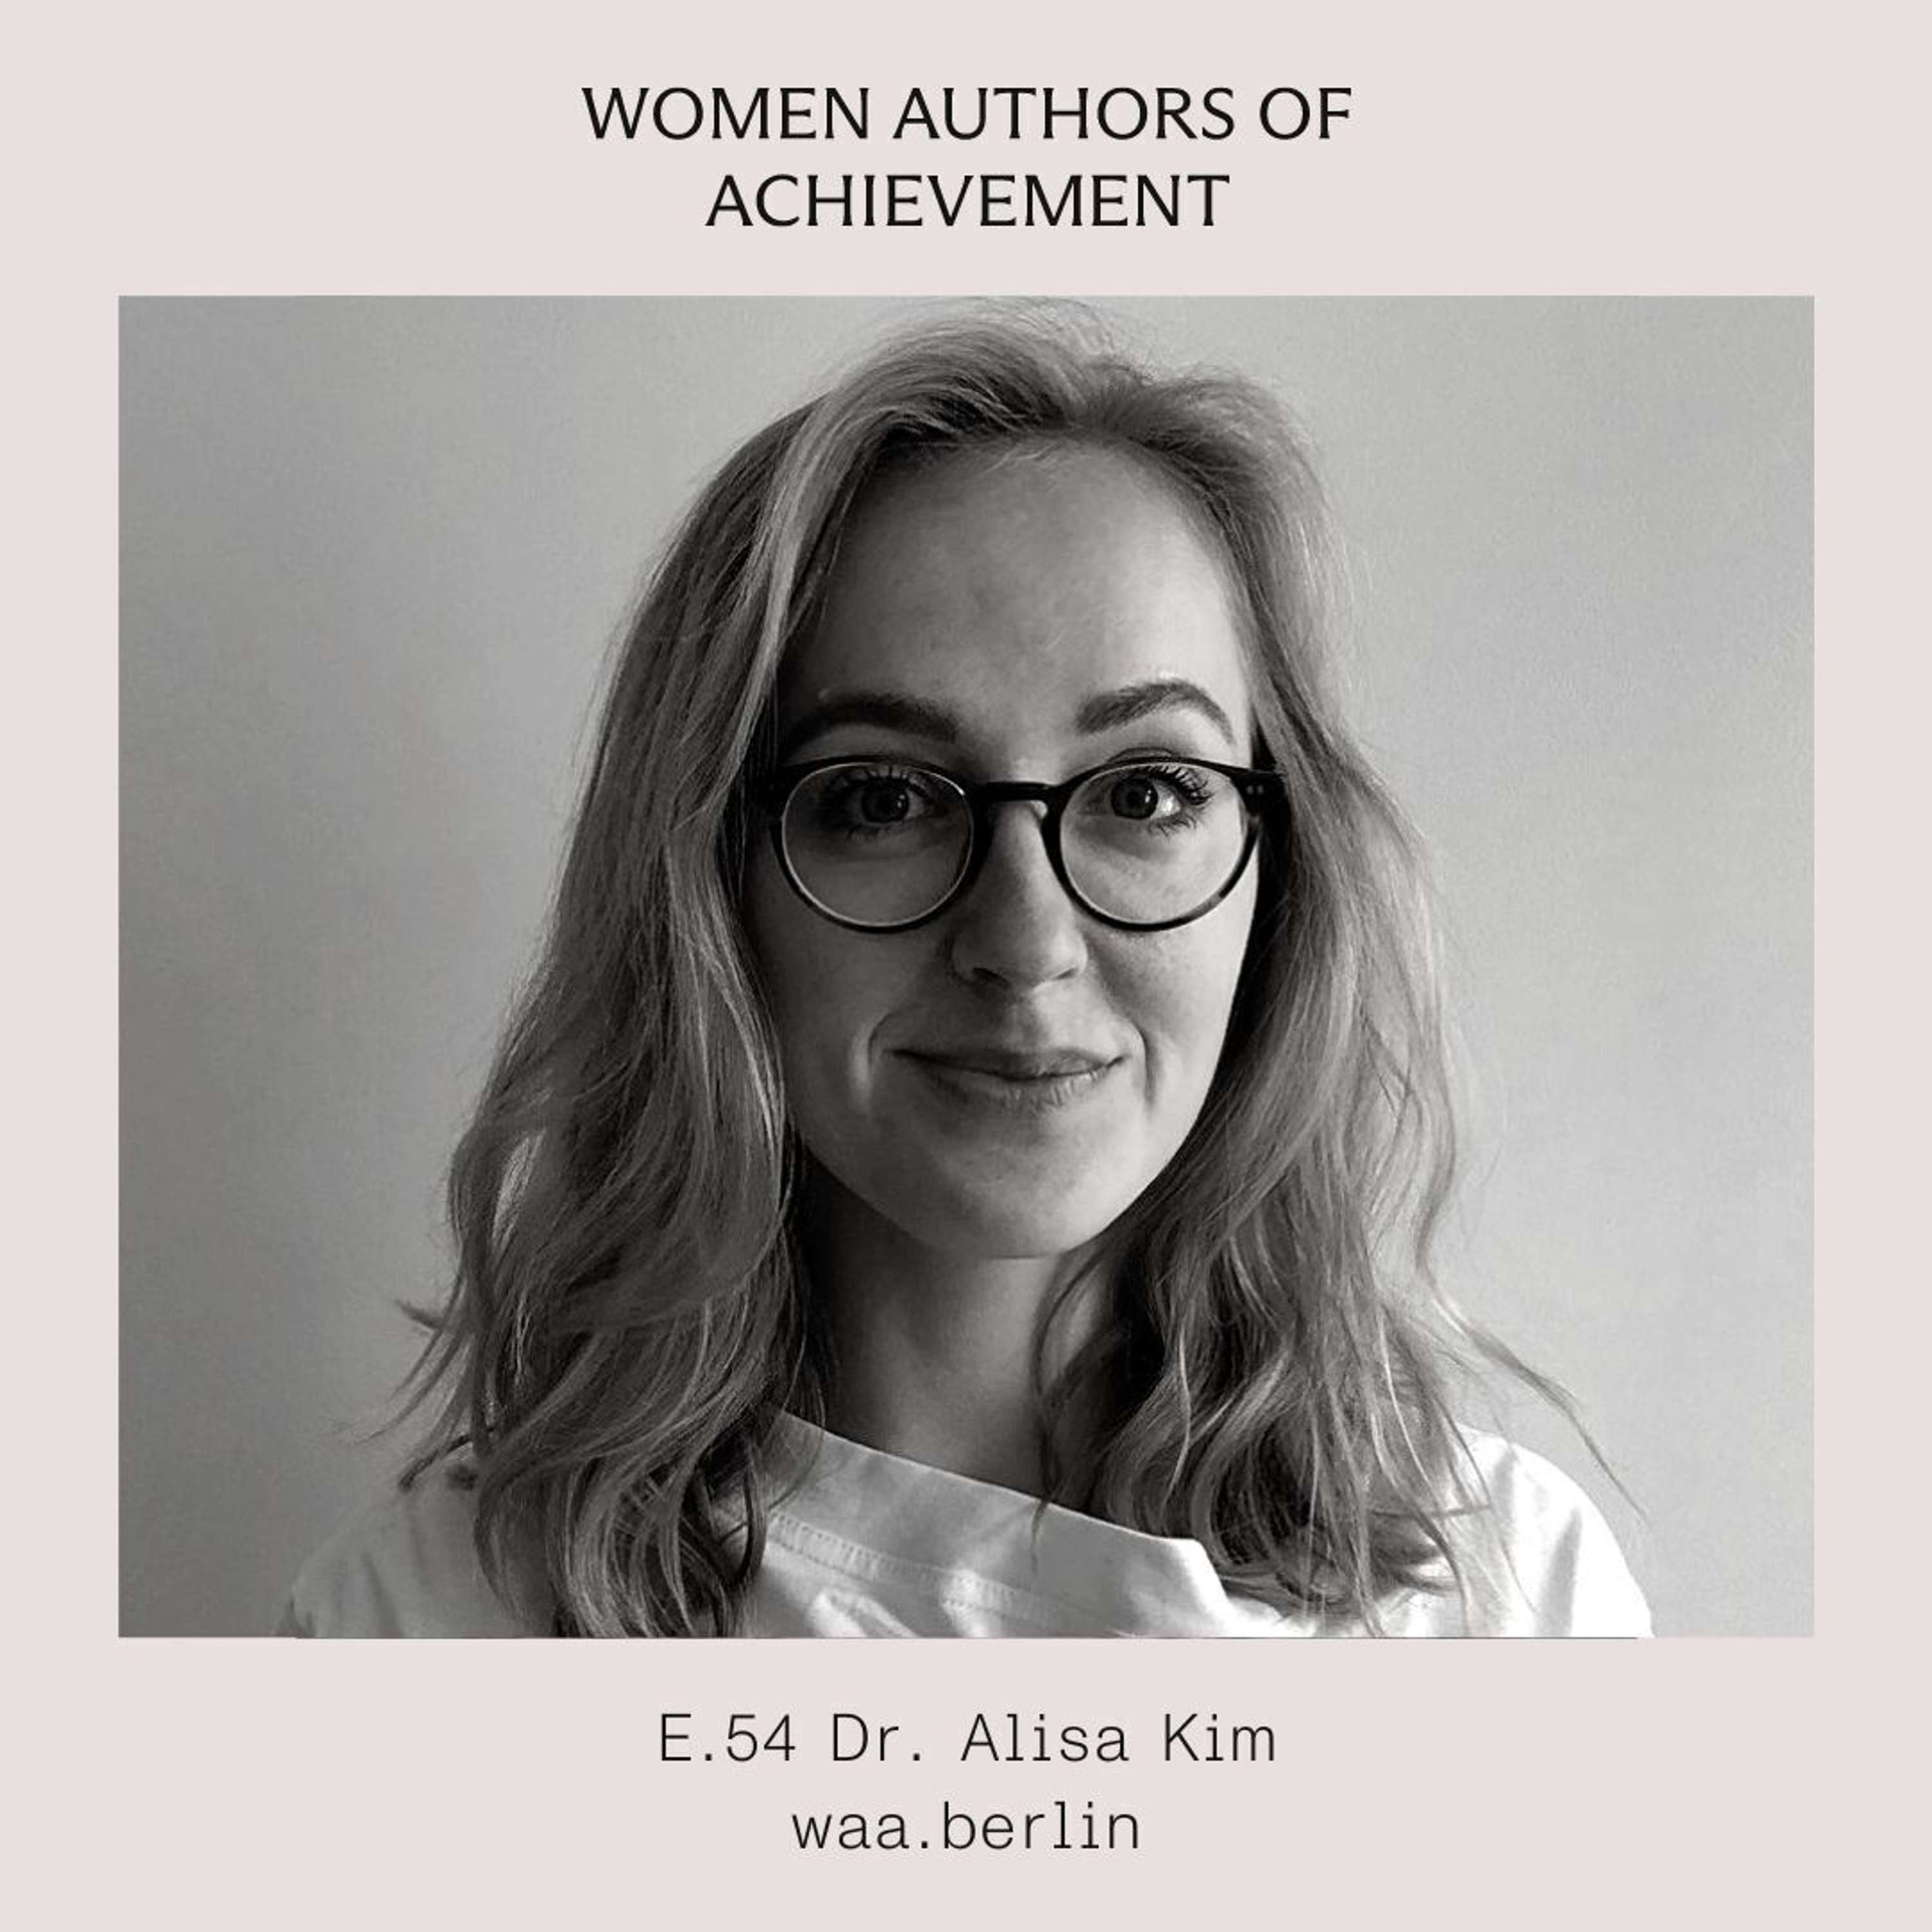 E.54 On mastering Data Science and how one’s path is never linear with Dr. Alisa Kim